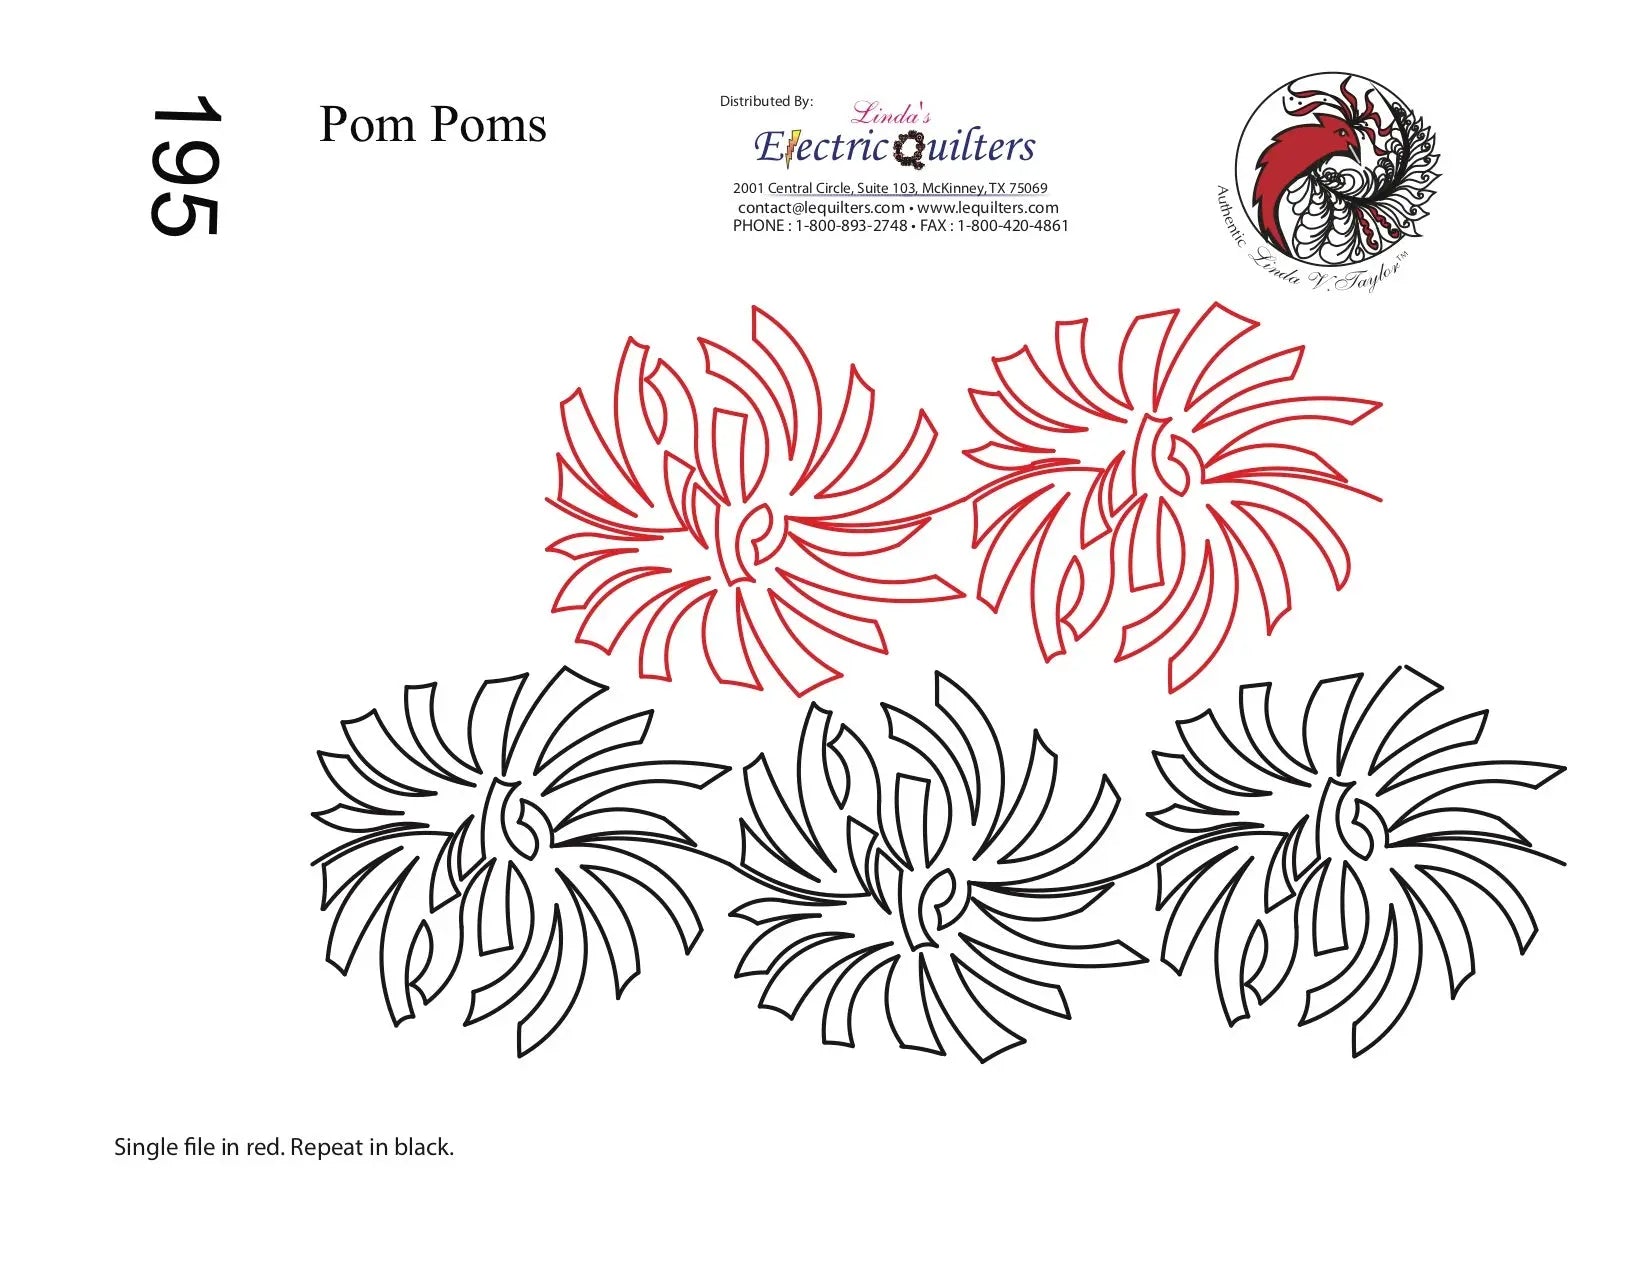 195 Pom Poms Pantograph by Linda V. Taylor - Linda's Electric Quilters